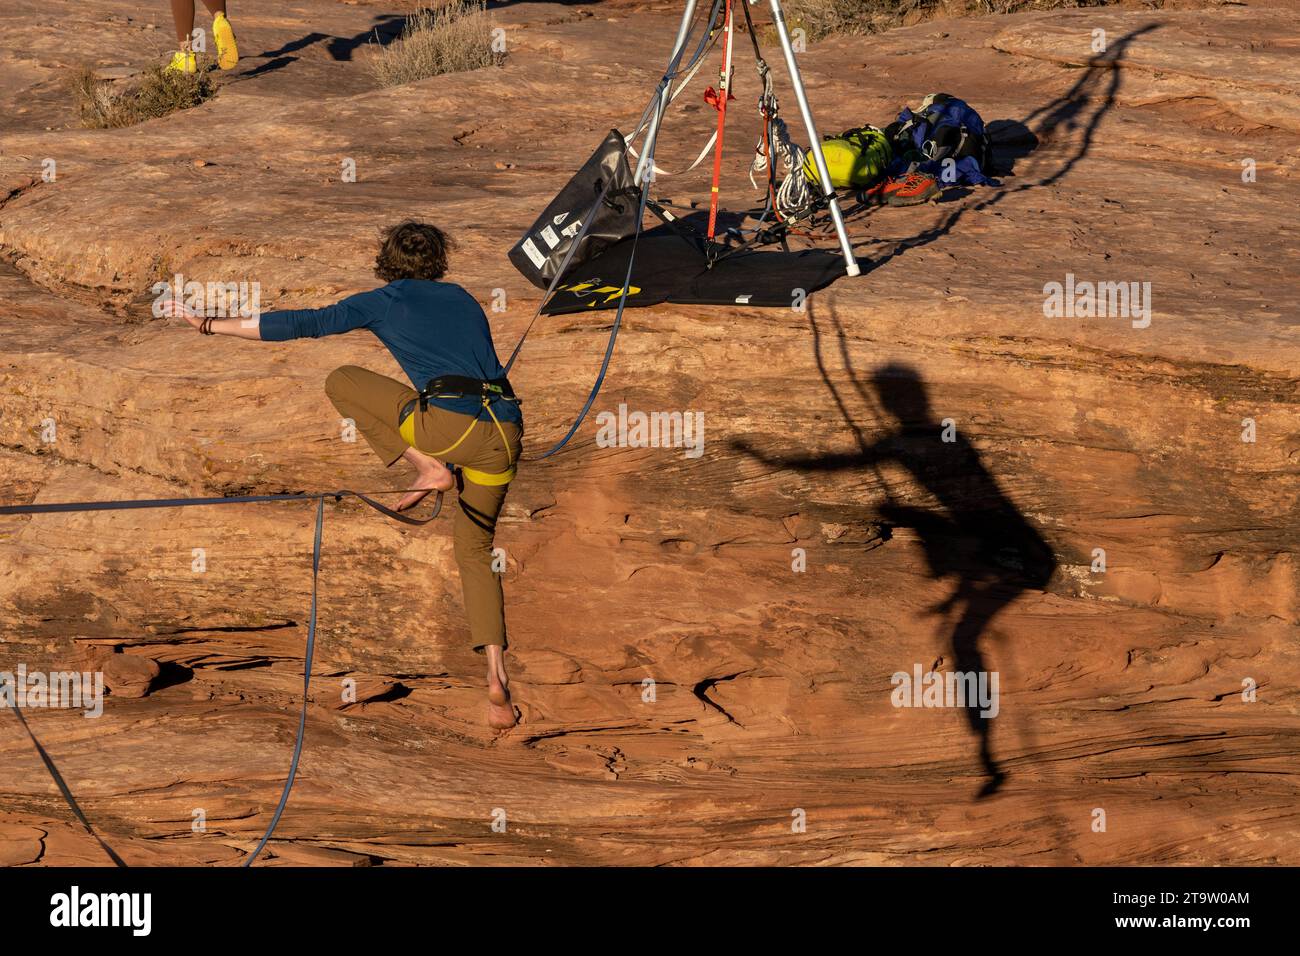 A man remounts the highline after a fall over Mineral Canyon at the GGBY World Highline Festival near Moab, Utah. Stock Photo